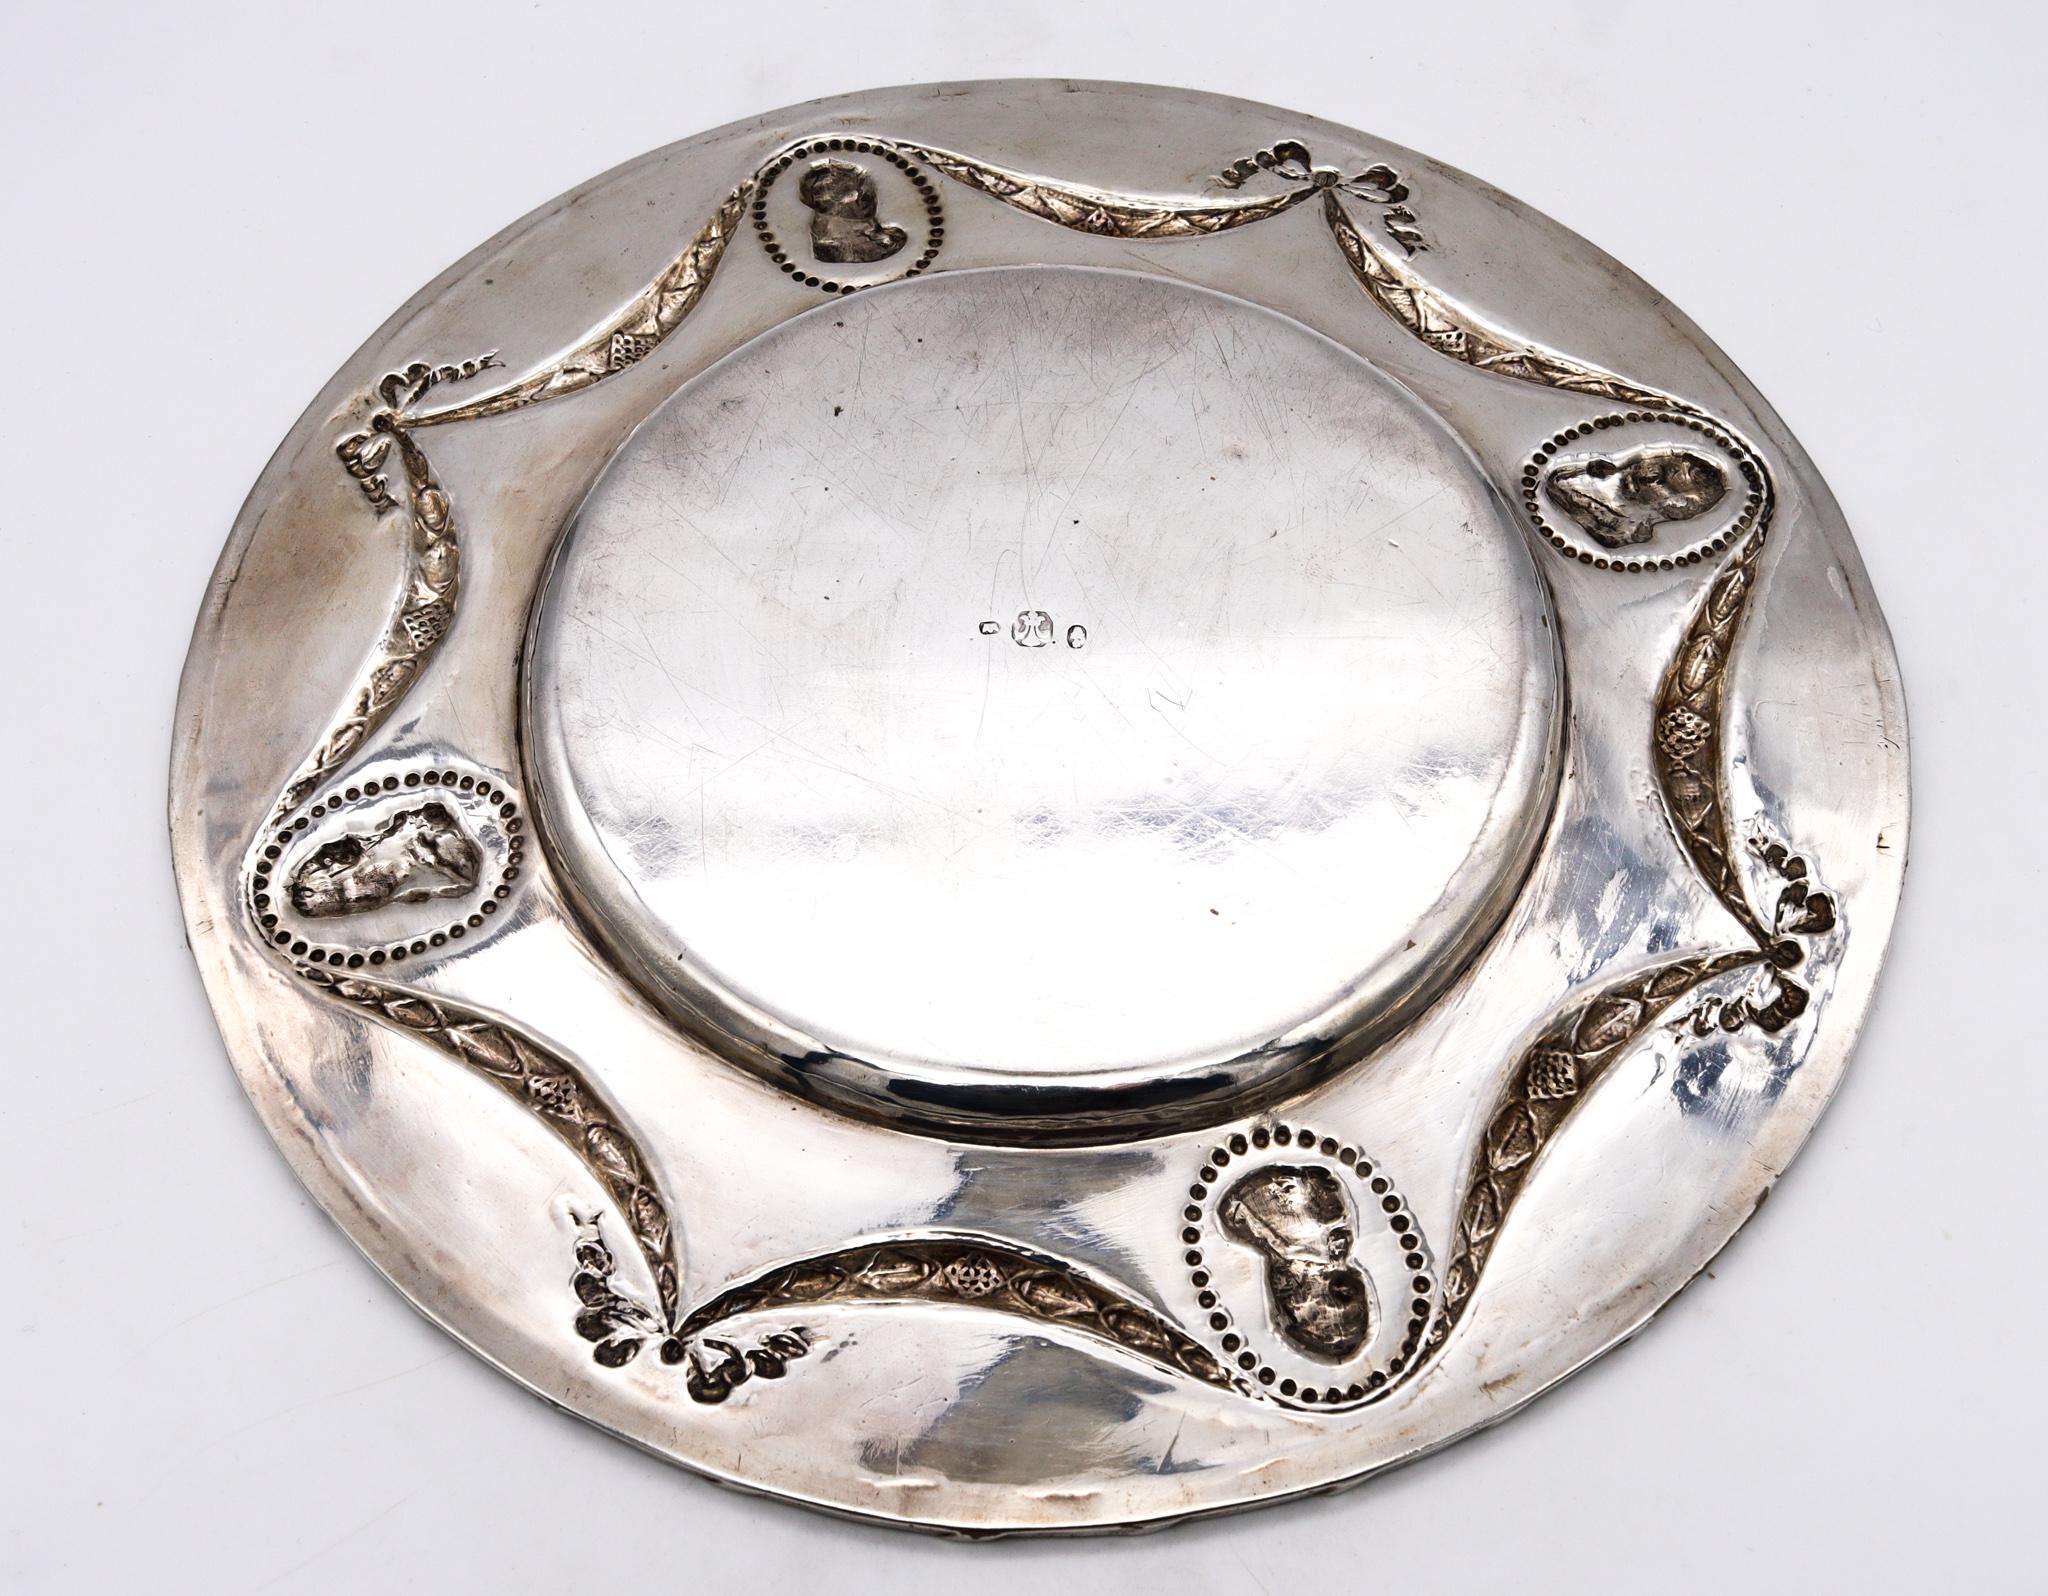 Germany Hanau 1820 Neoclassical Decorative Dish Plate in Solid Sterling Silver In Excellent Condition For Sale In Miami, FL